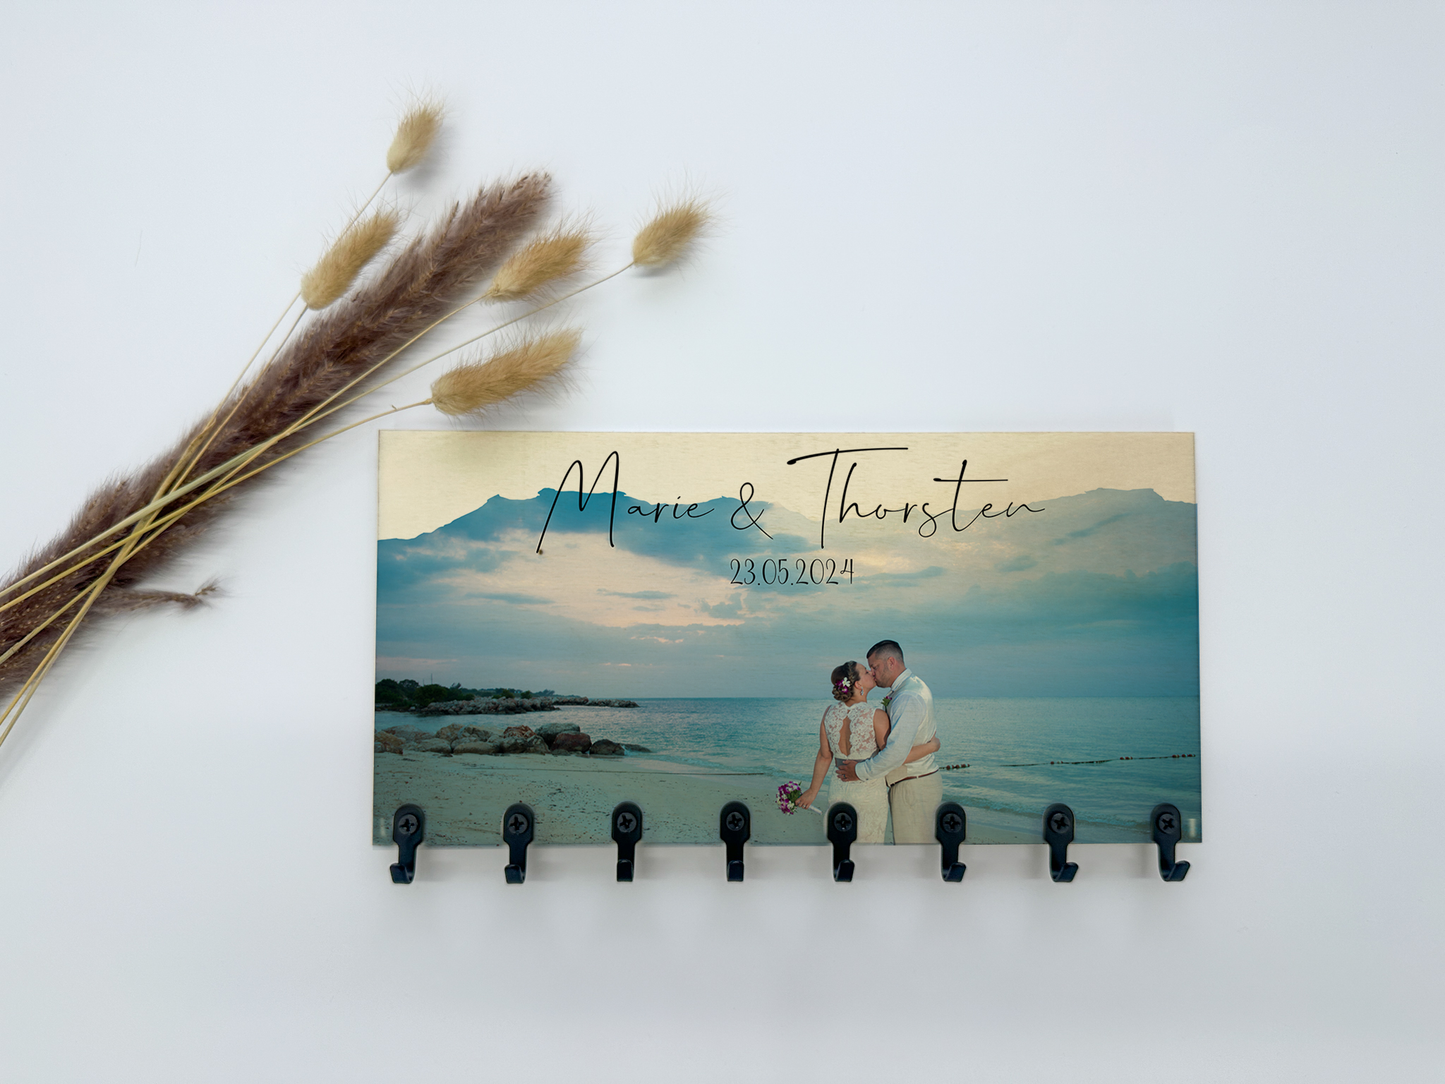 Photo key rack personalized with your photo &amp; desired text/key rack made of wood/housewarming gift idea/wedding gift idea/topping out ceremony gift